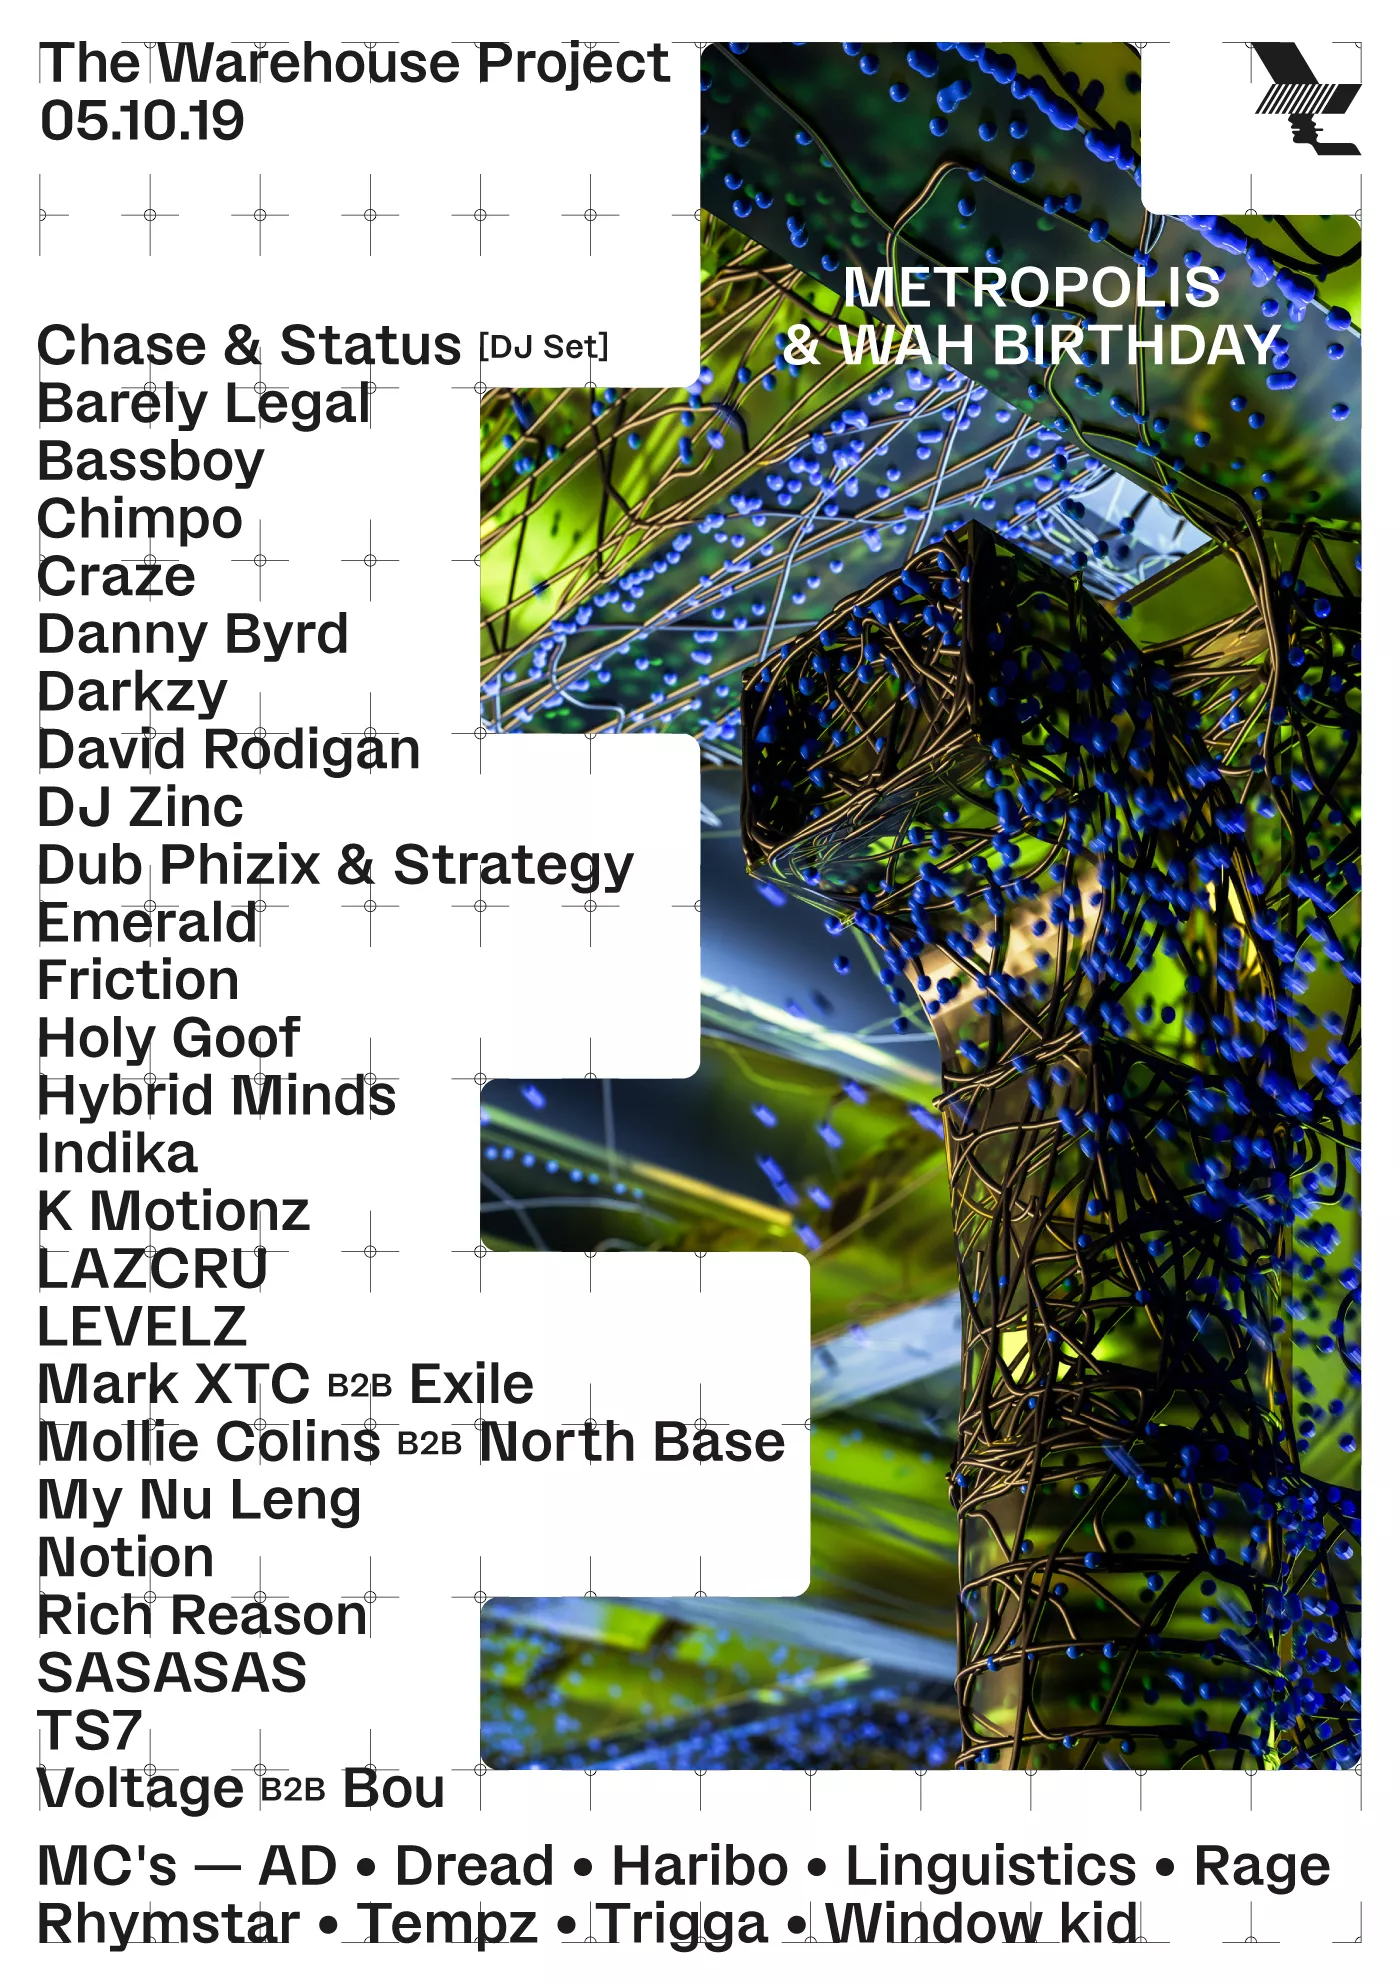 WHP Lineup Poster04